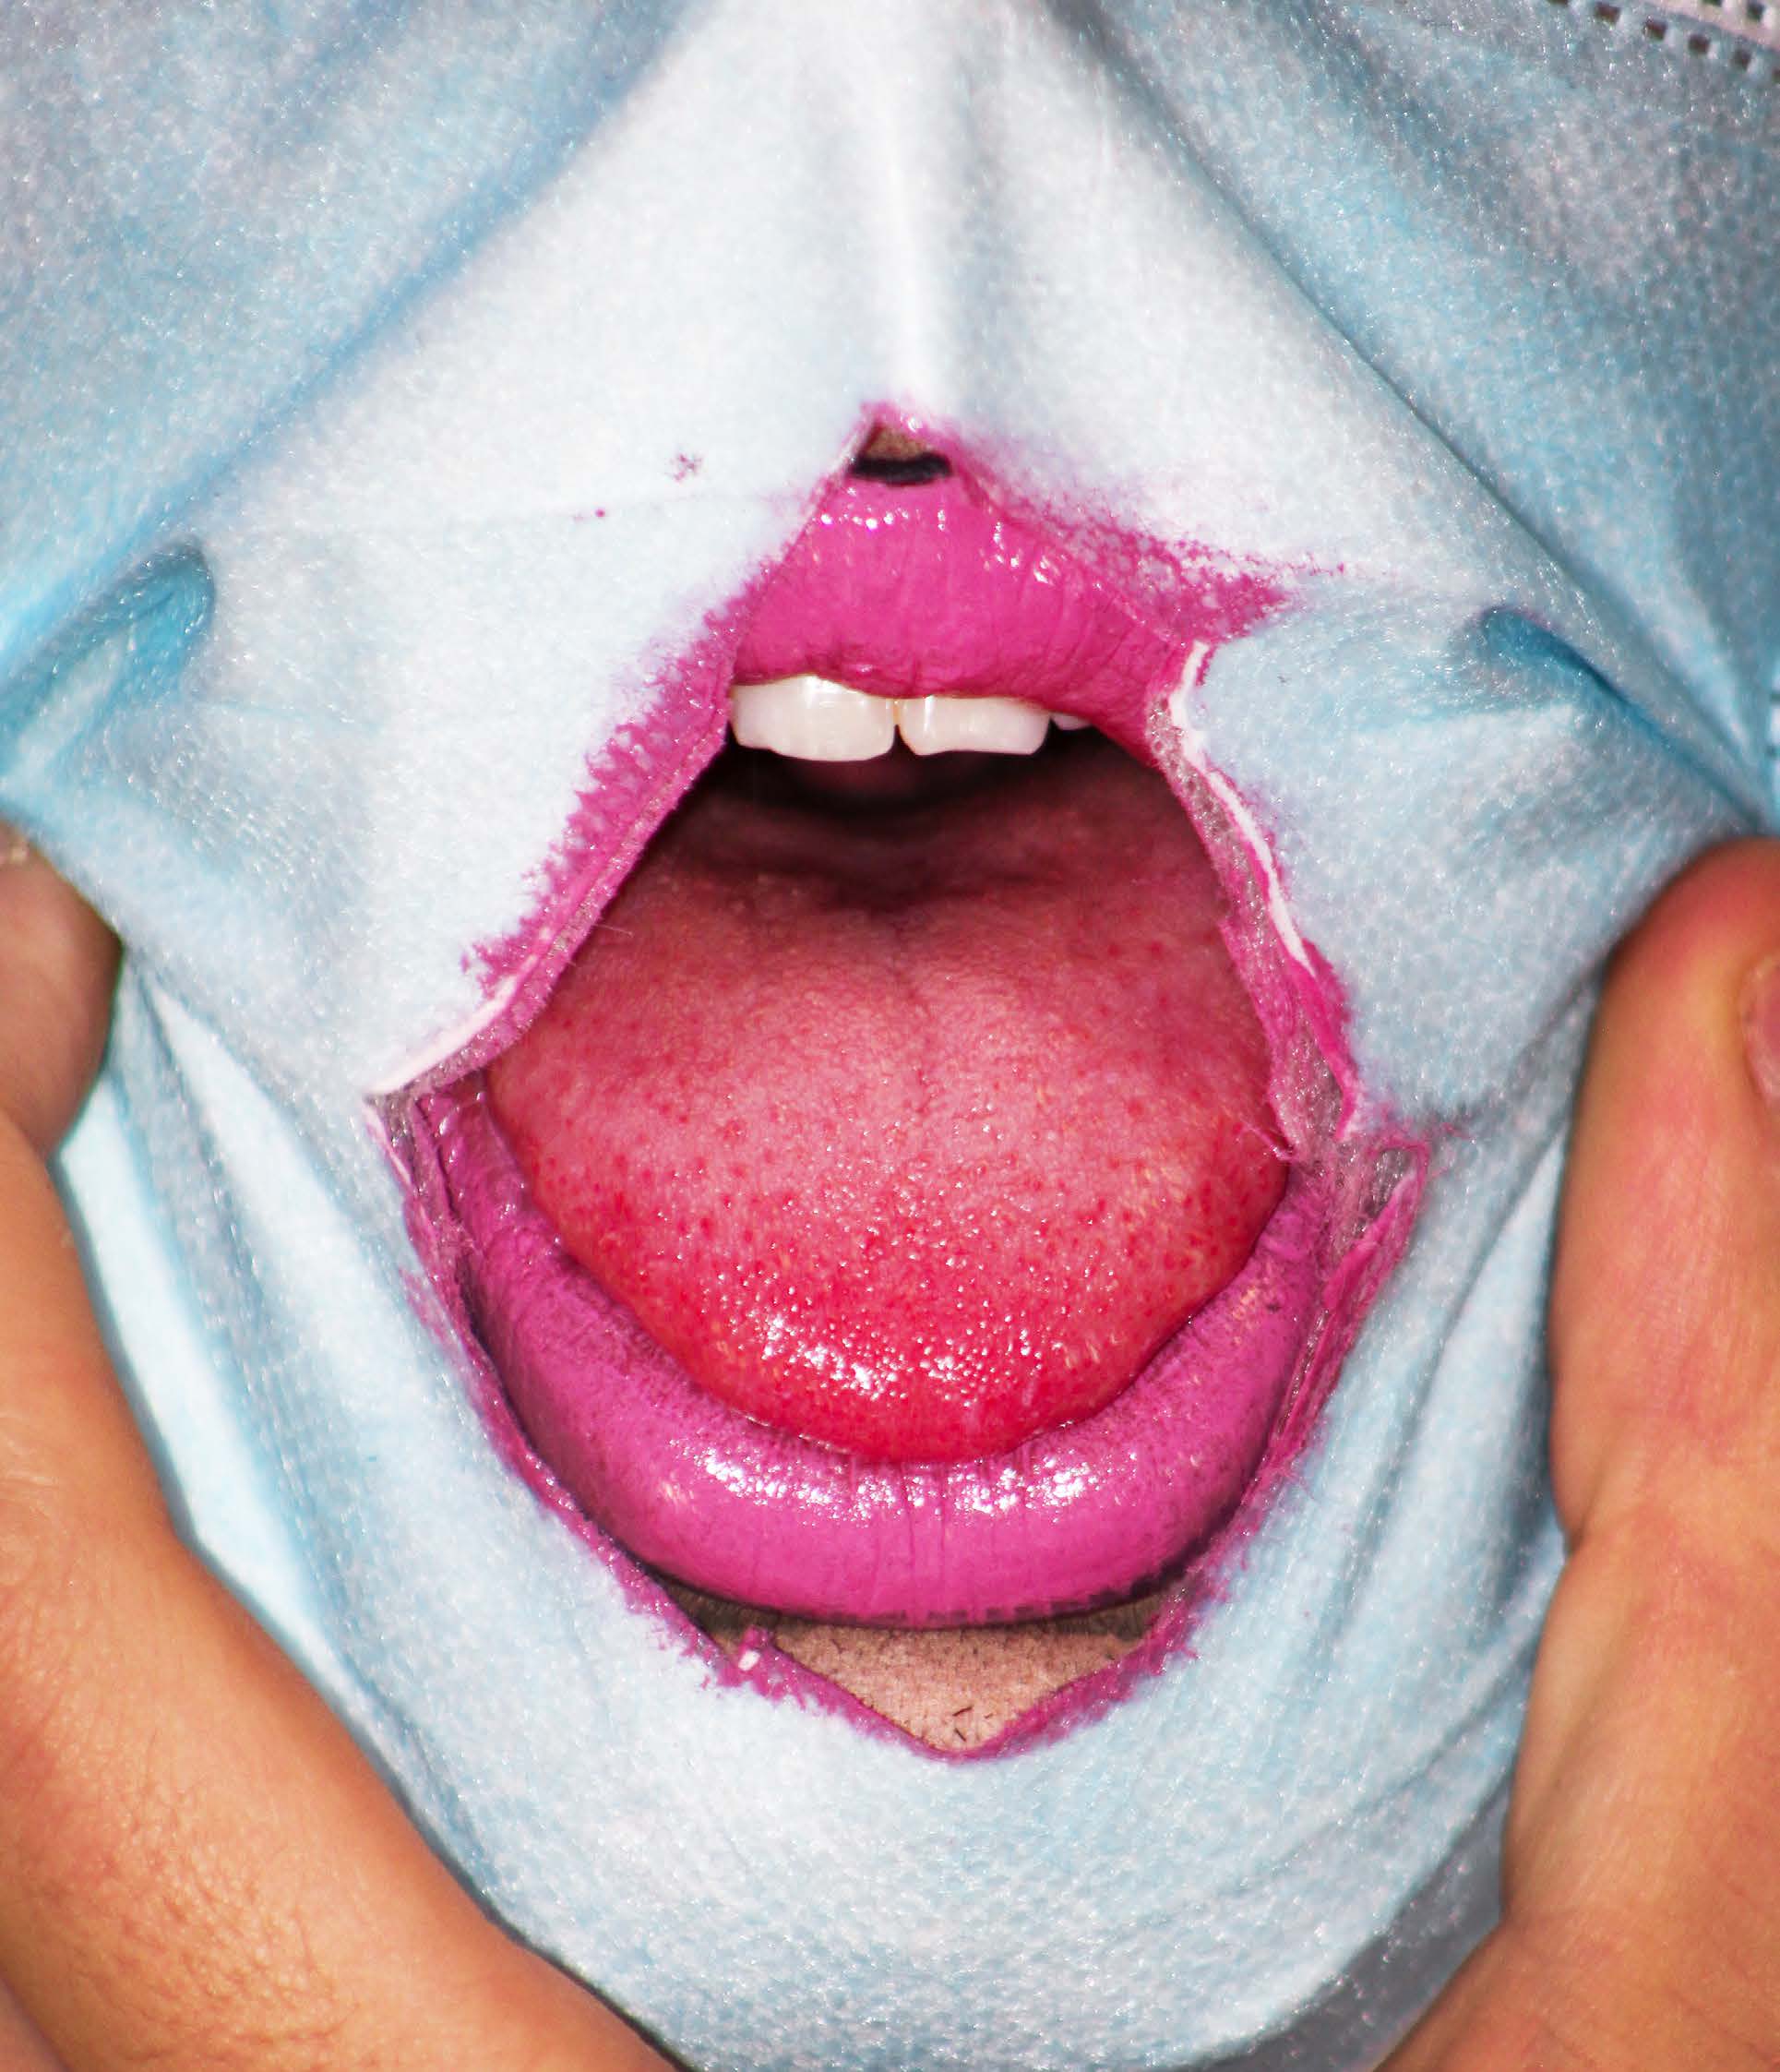 Picture shows face mask, with mouth showing through wearing pink lipstick 